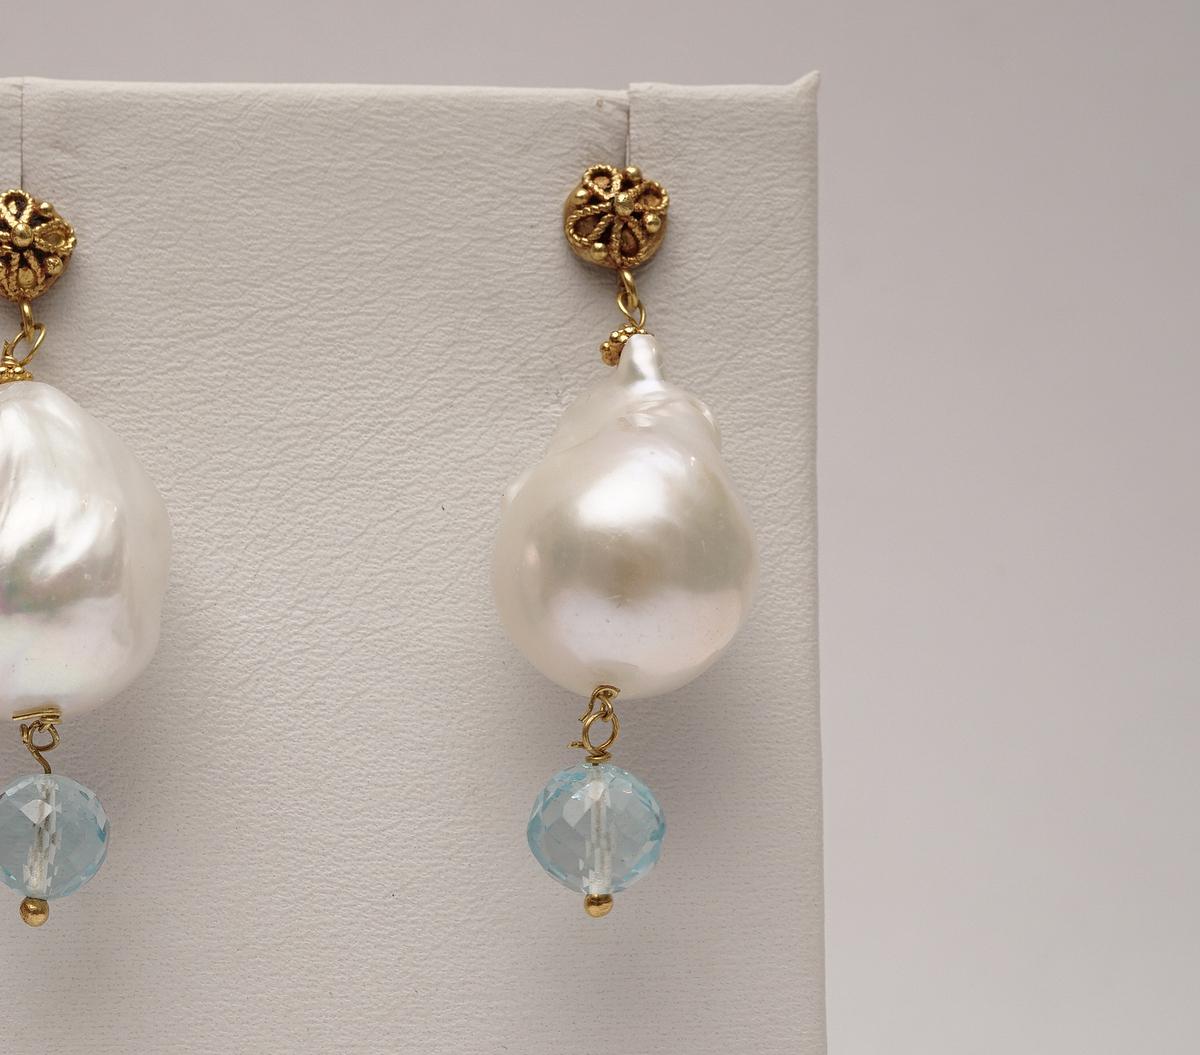 Pair of white baroque pearl dangle earrings with faceted aquamarine drops.  22K gold post for pierced ears.  16mm pearls. Fine granulation work on the post.  By Deborah Lockhart Phillips